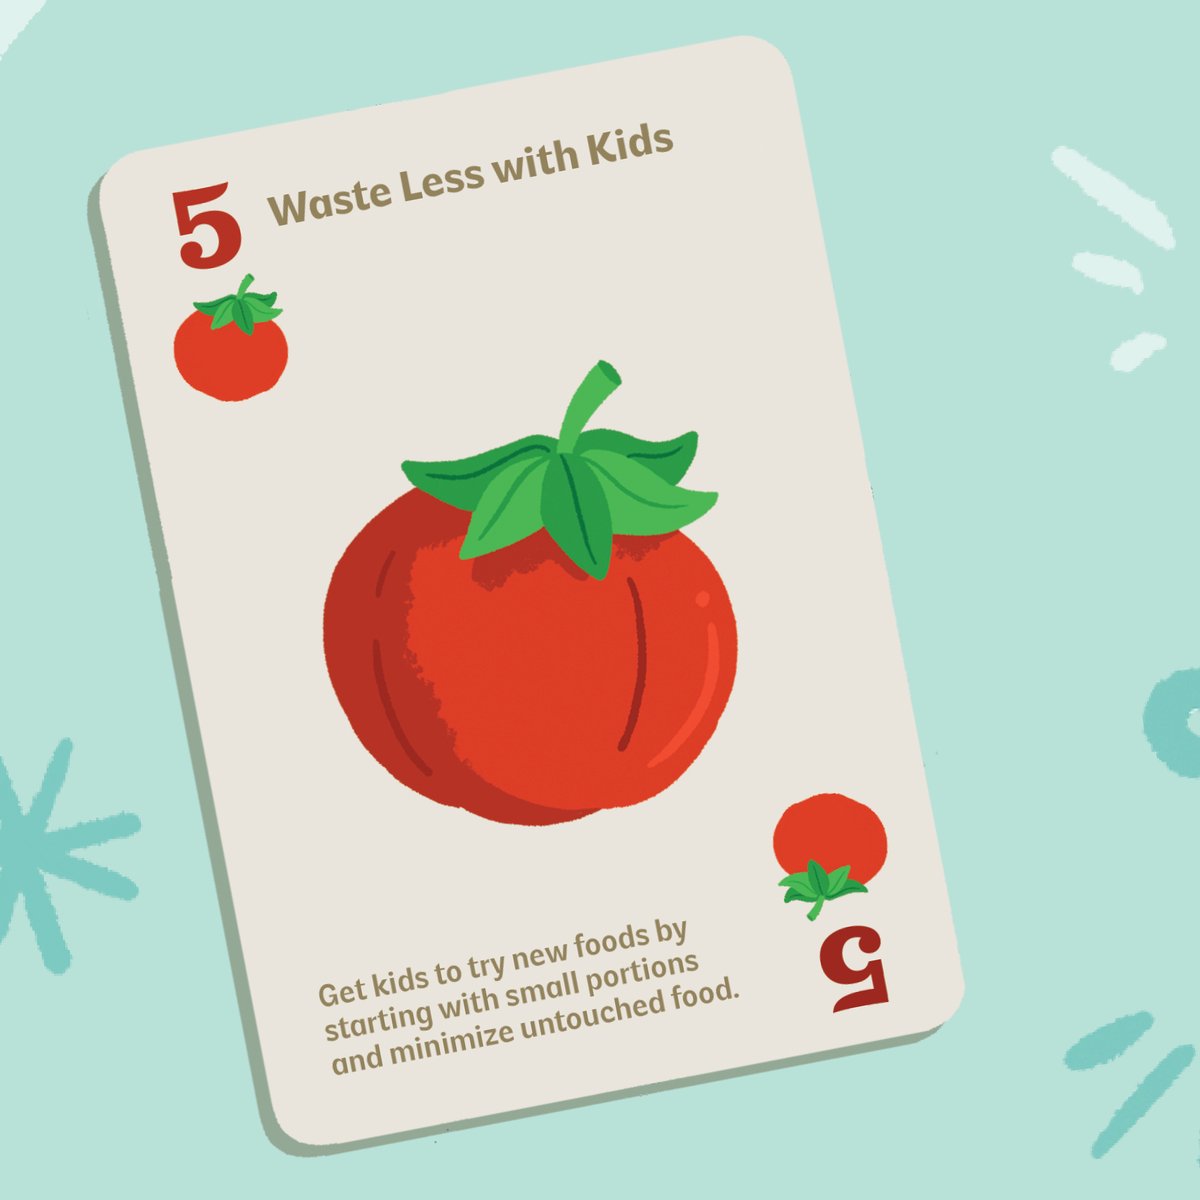 Today’s #StopFoodWasteDay tip starts with our kids!

When you introduce new foods to your kids, make sure to monitor portions to ensure food doesn’t go untouched.

Visit our website for more tips! bit.ly/49Og0fB